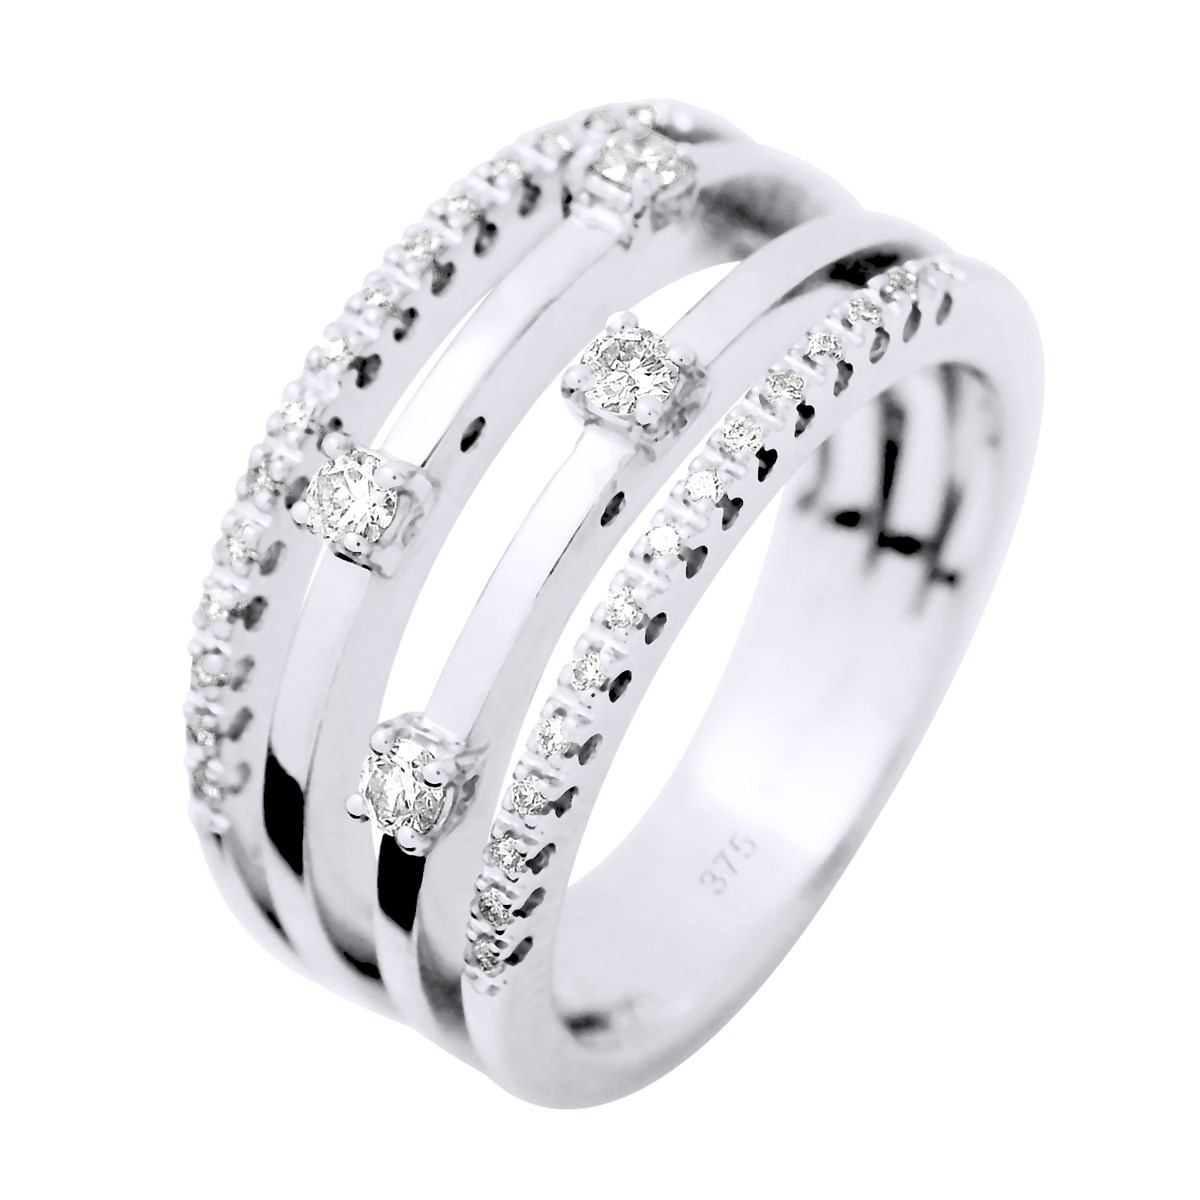 Bague Diamants 0,32 Cts Satellite Joaillerie Or Blanc